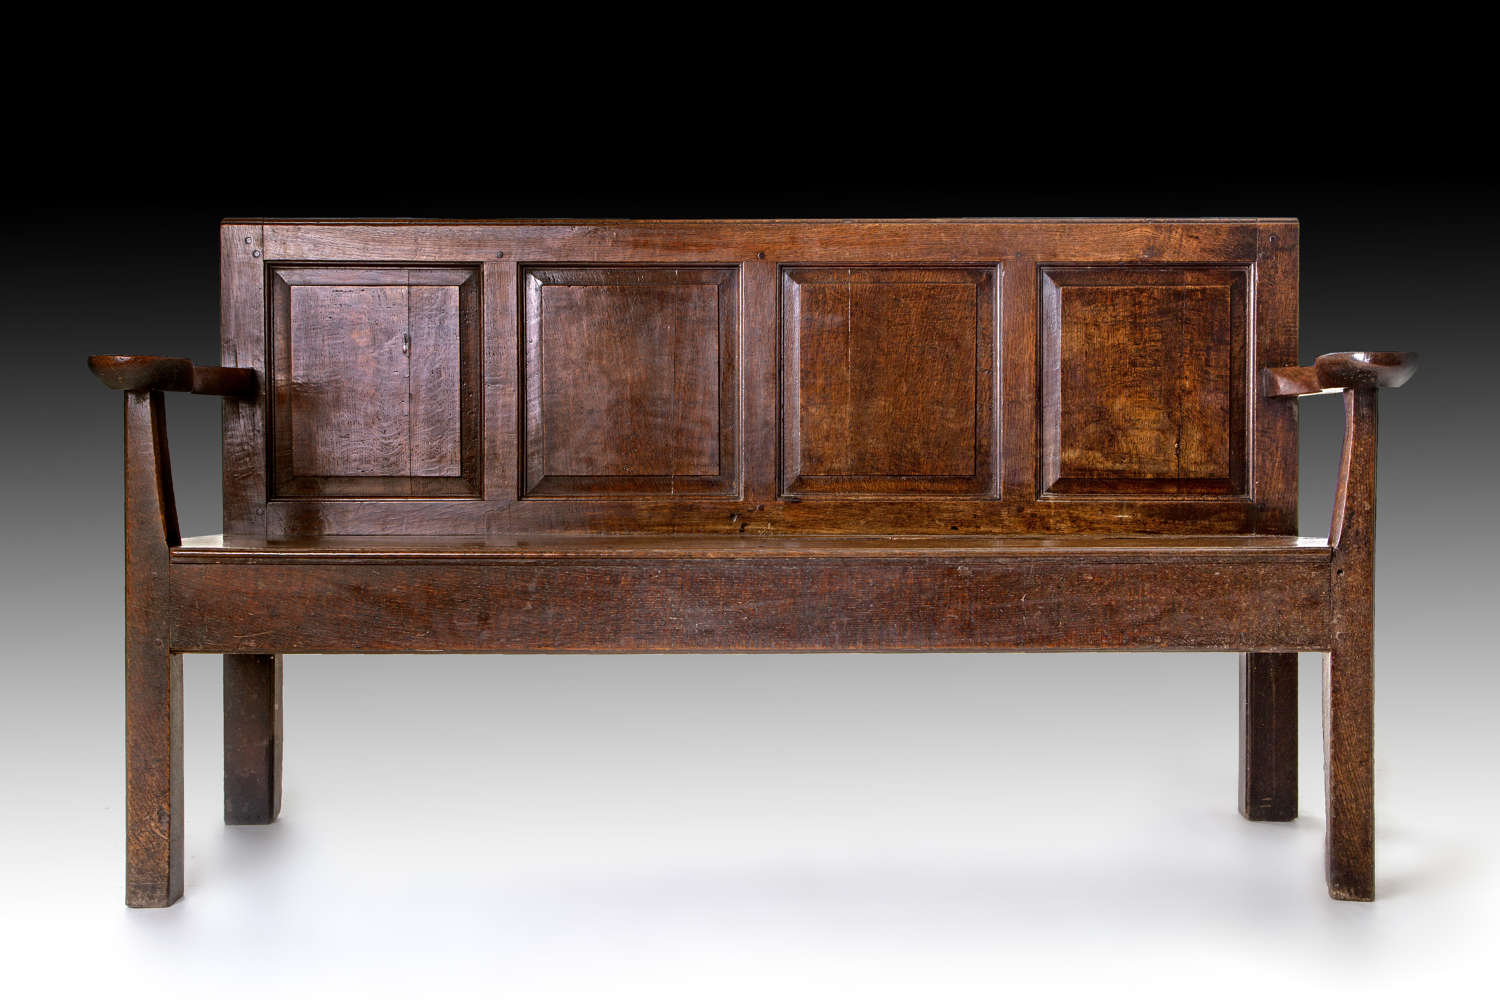 An late 18th century oak hall bench